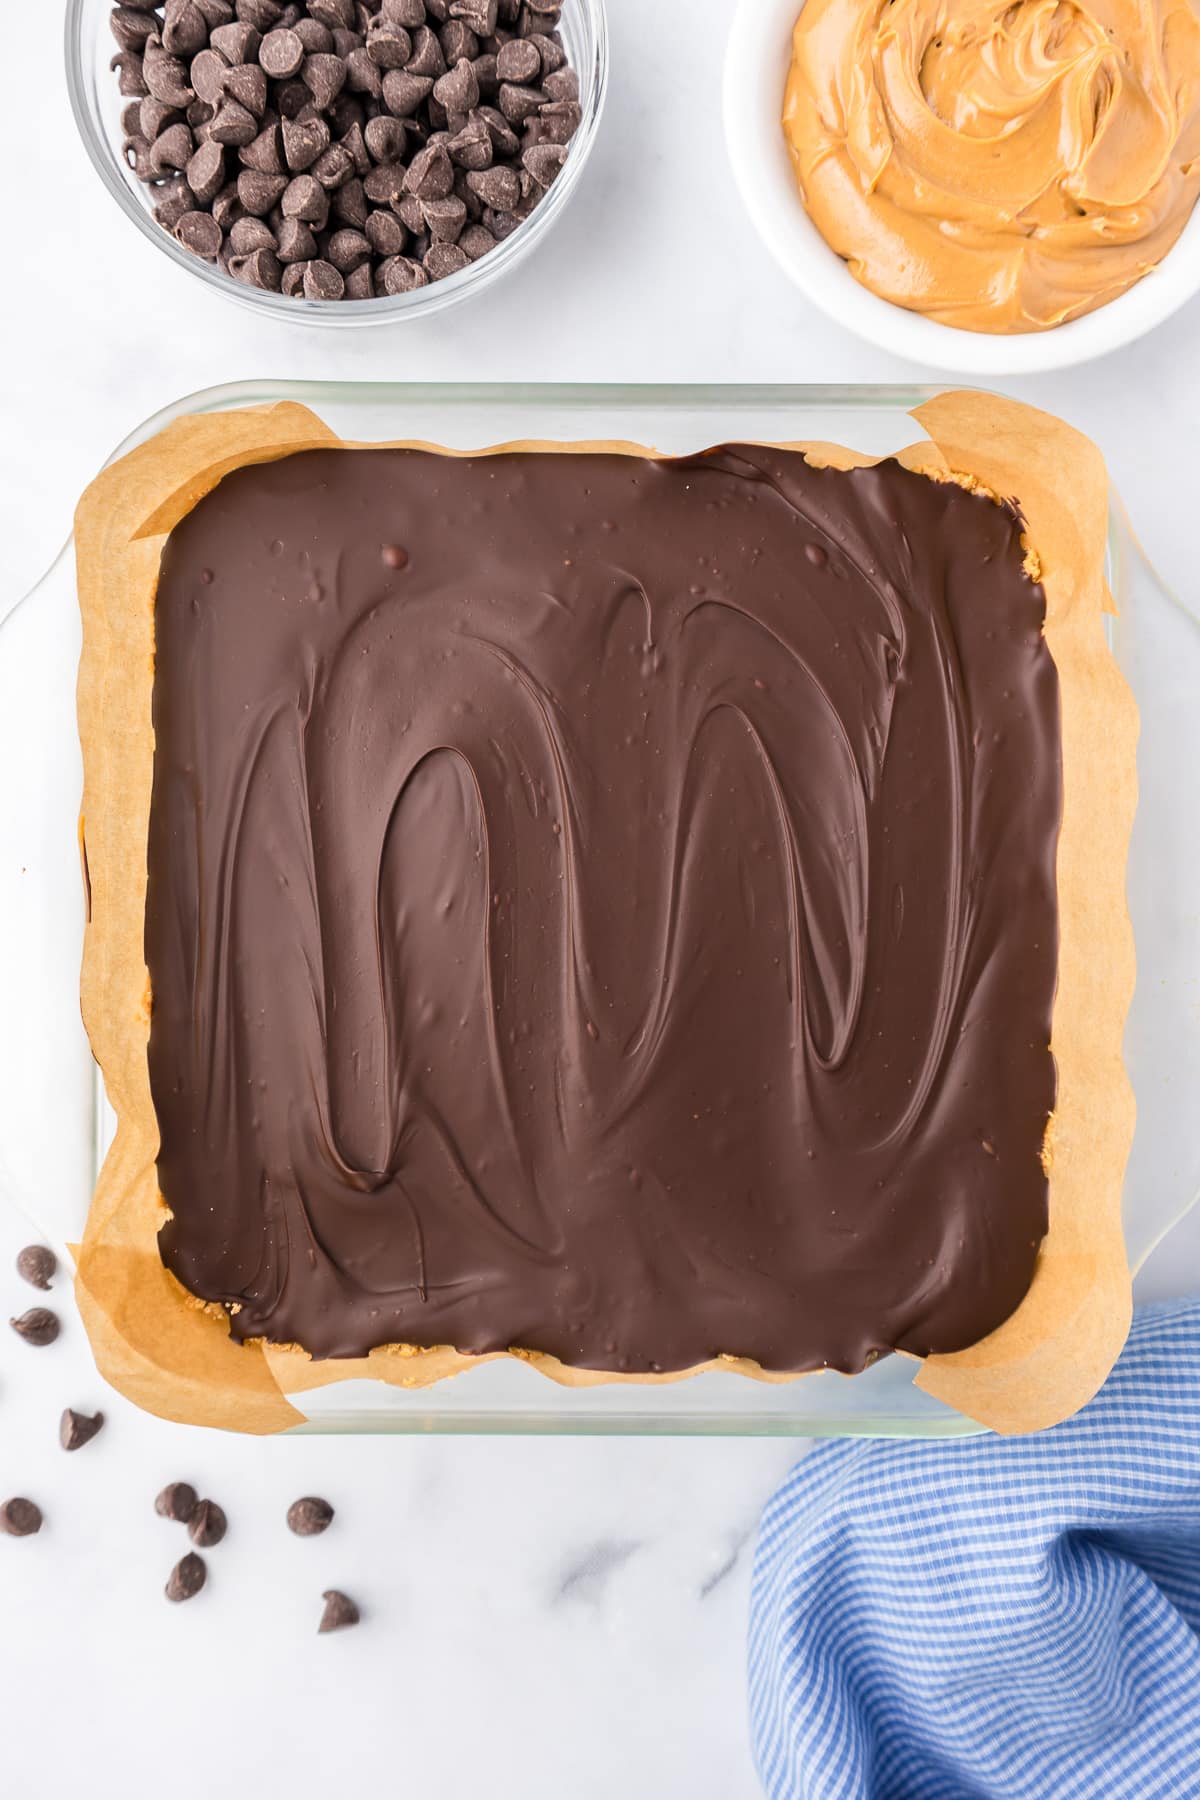 Peanut butter bars topped with chocolate in a square pan from above on a counter.